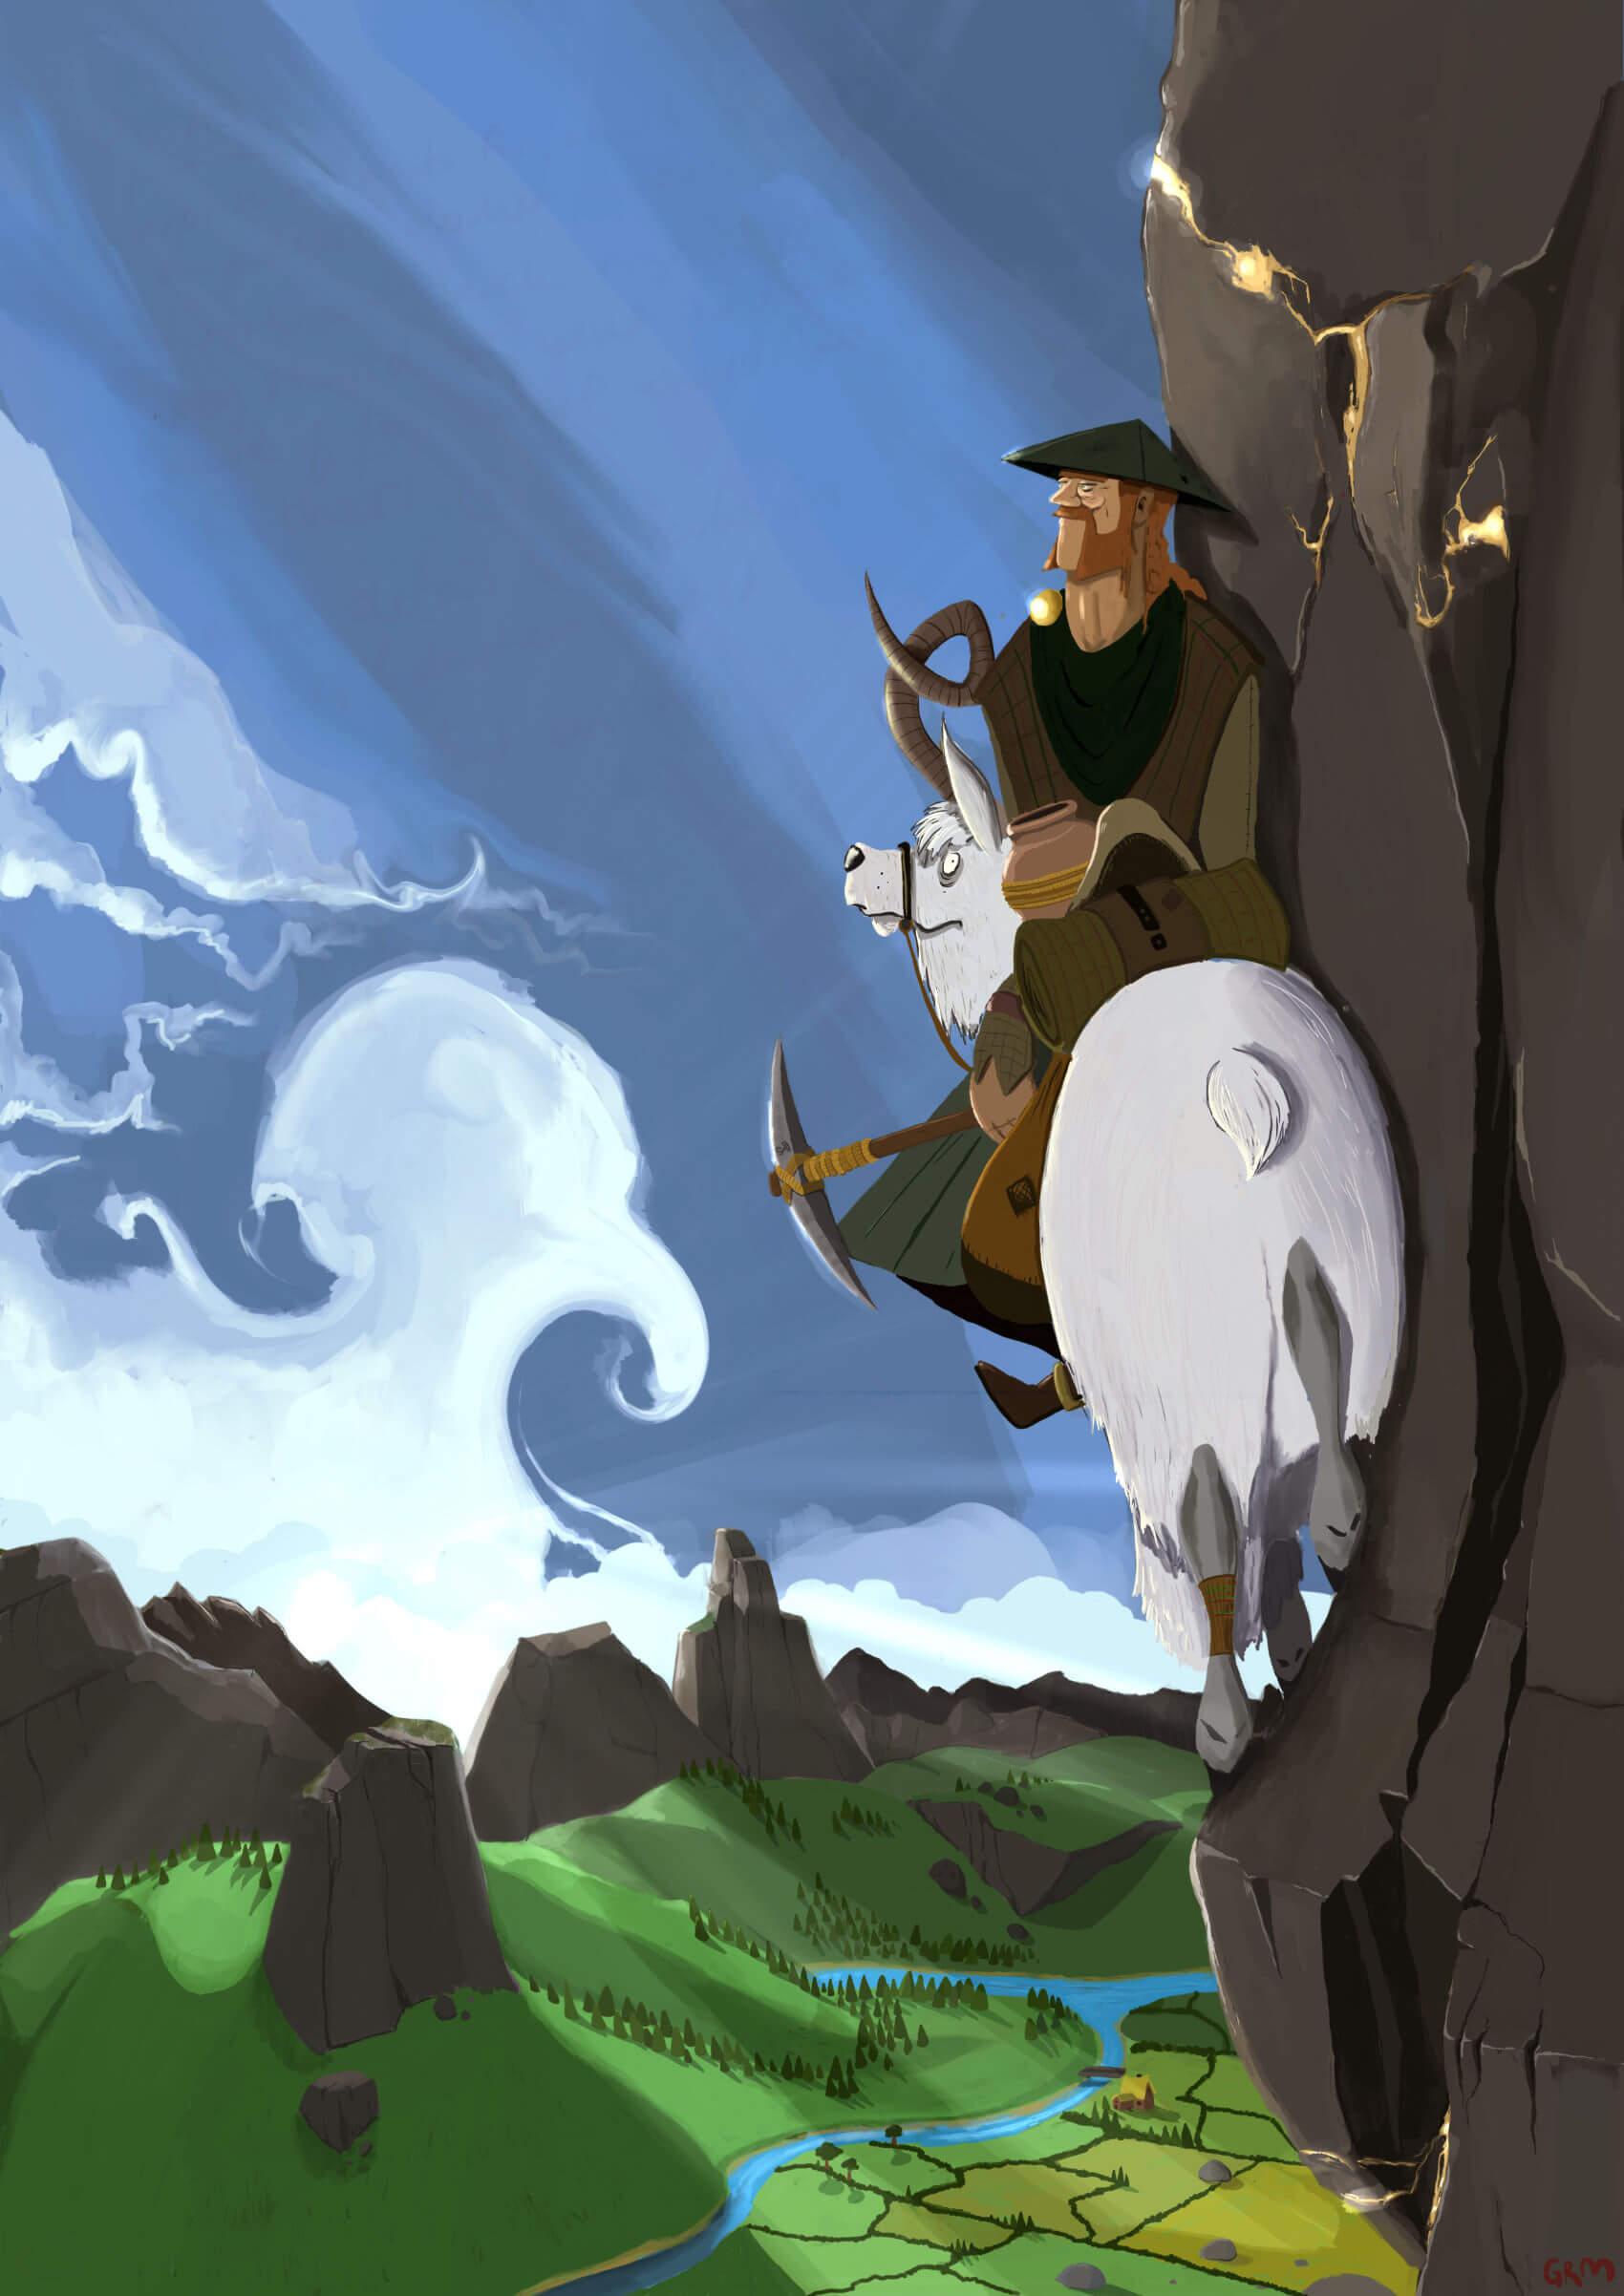 A man riding a goat like animal on the side of a cliff.